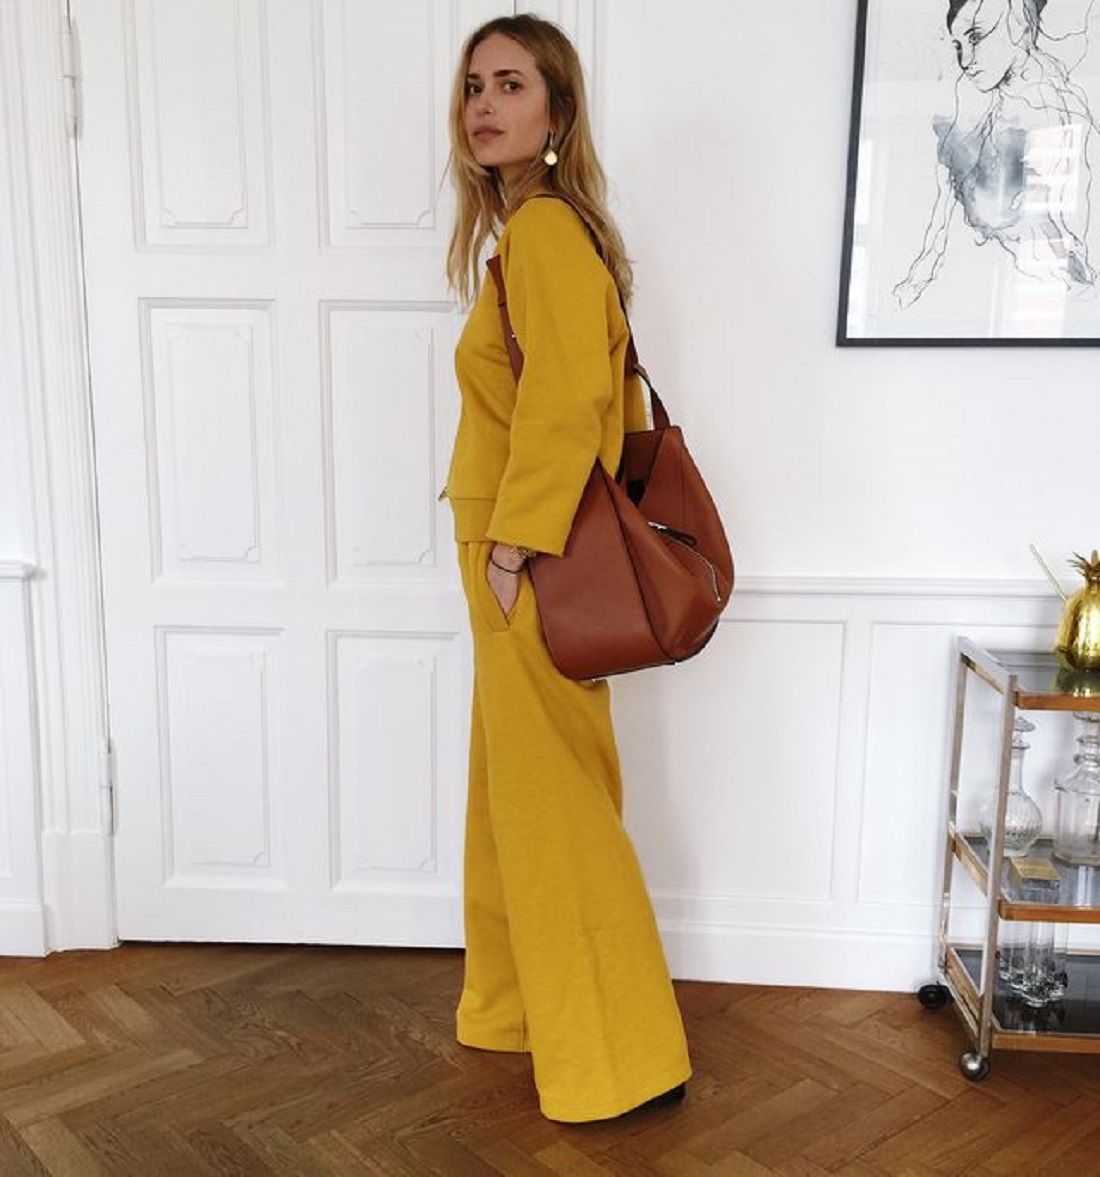 @projectfairytale: 15 Yellow outfits to transition into fall